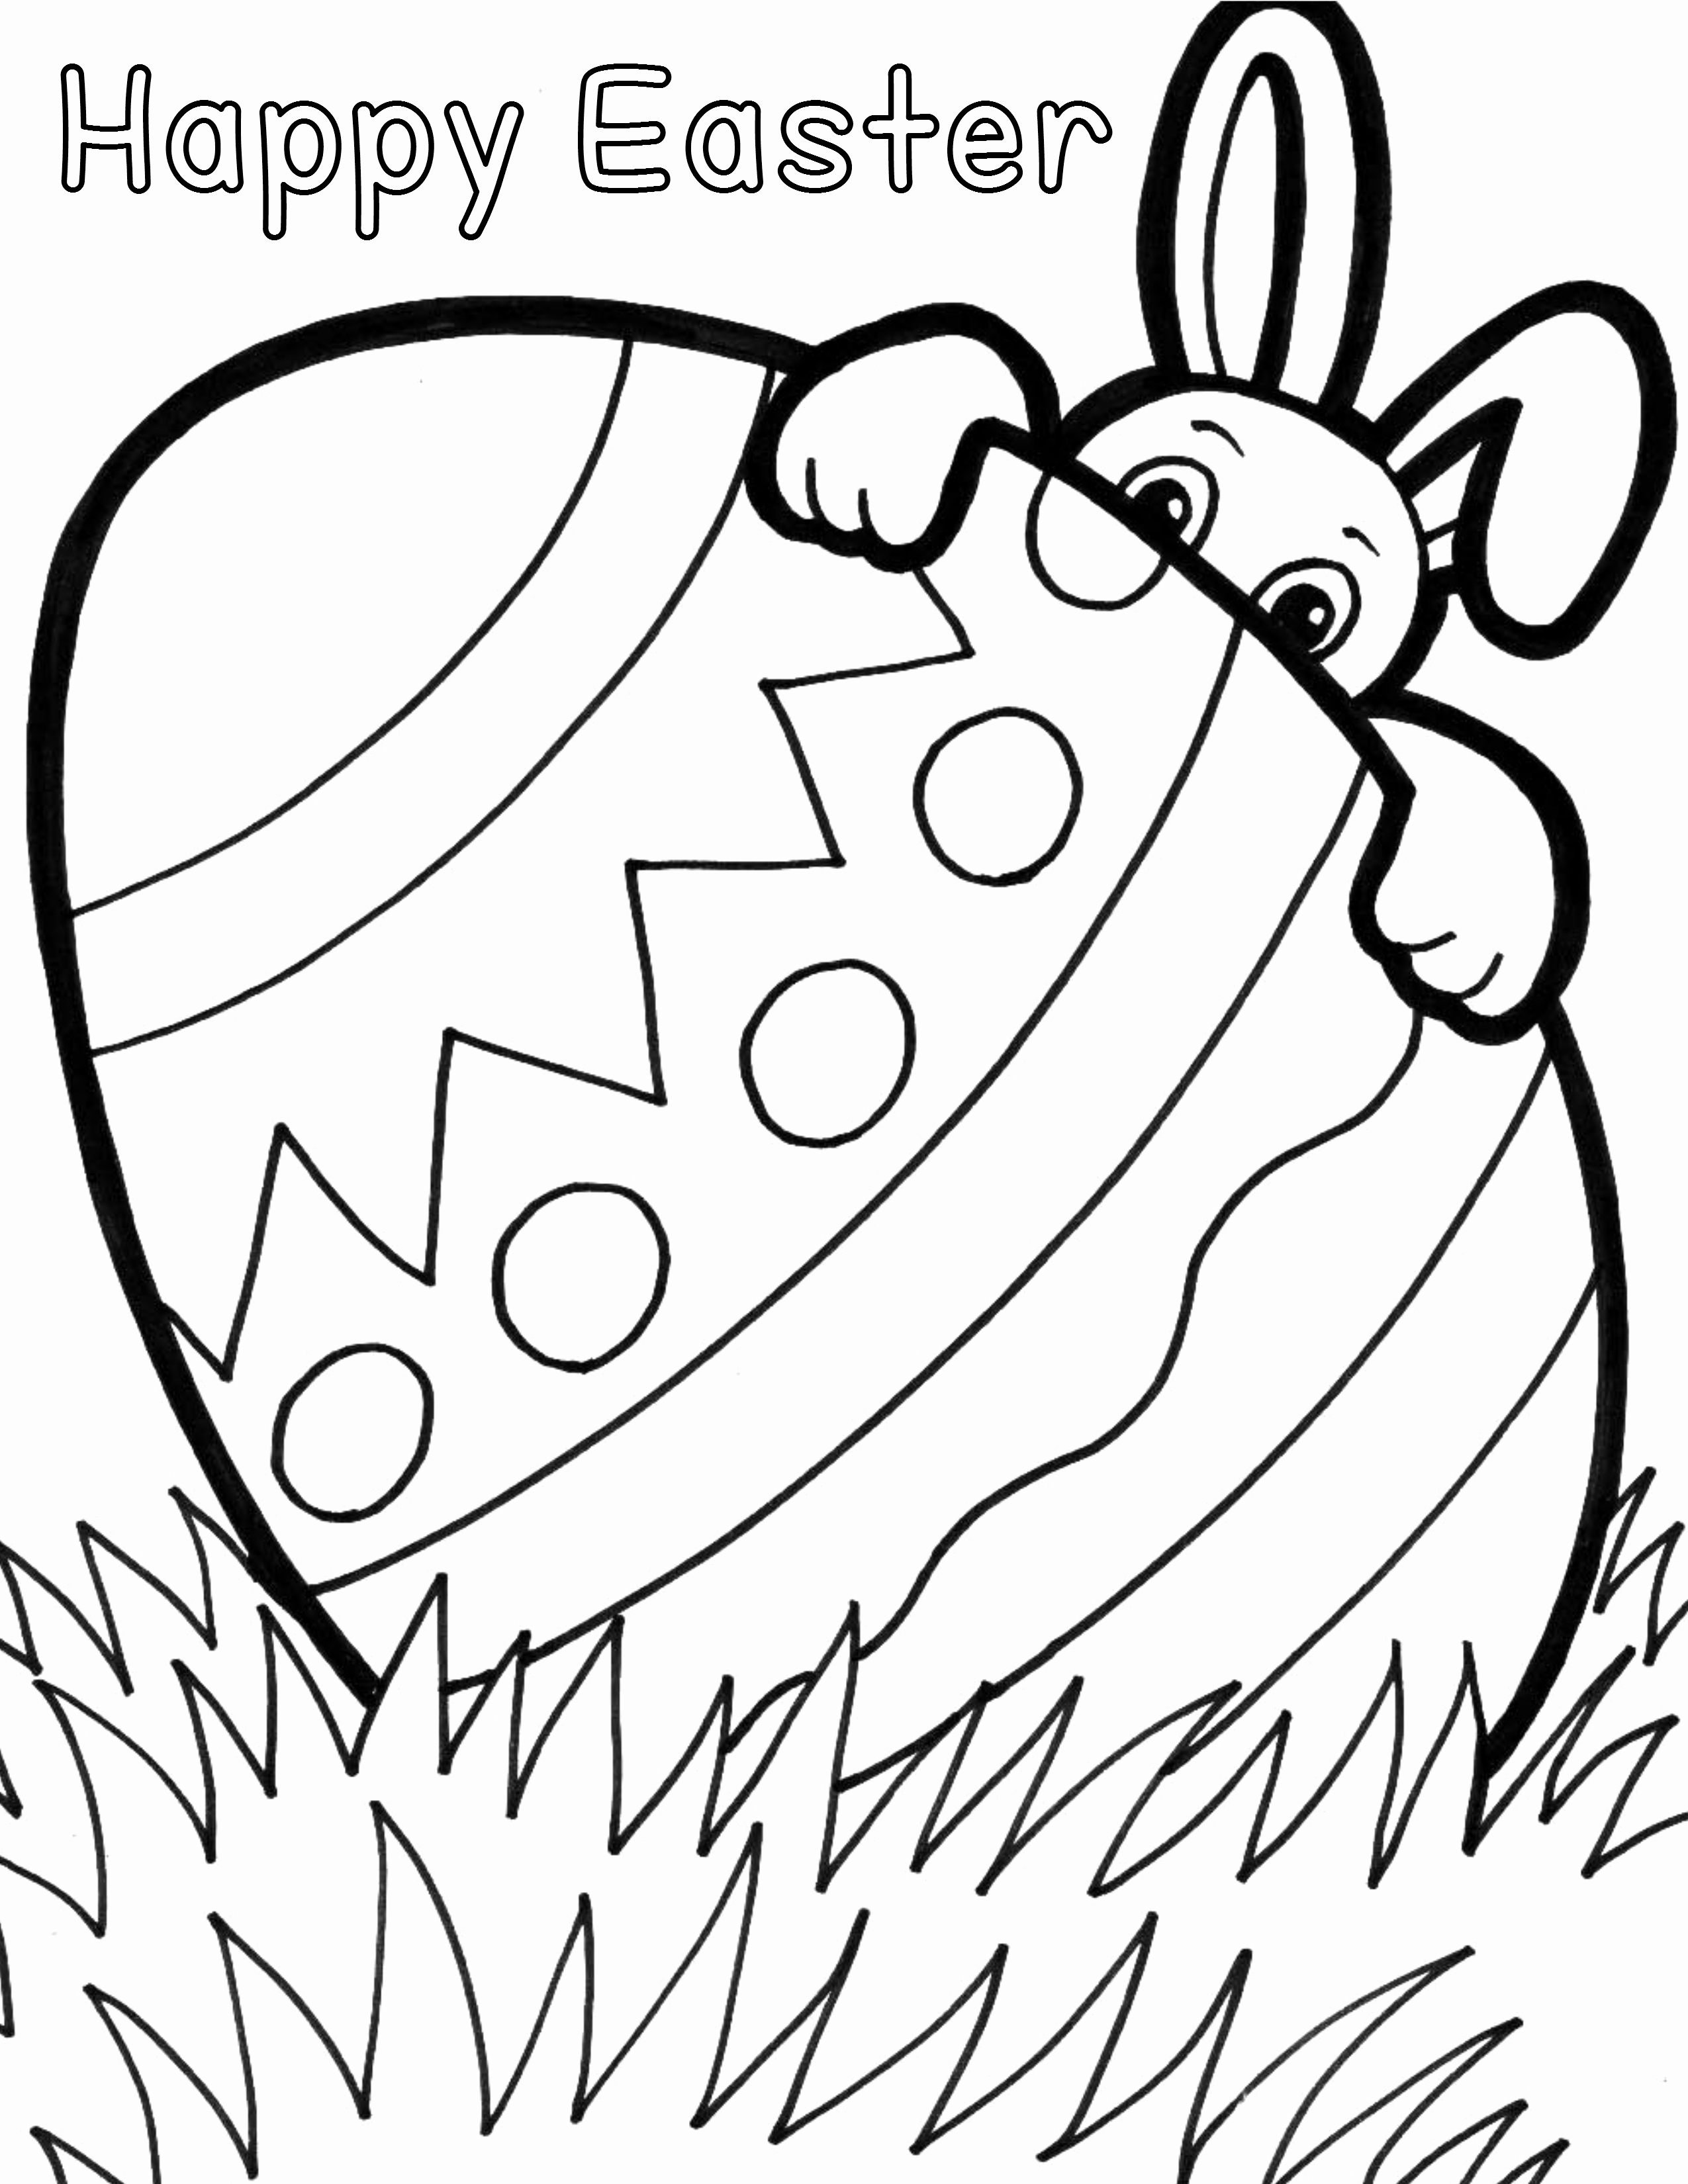 Happy Easter Coloring Pages at GetColorings com Free printable